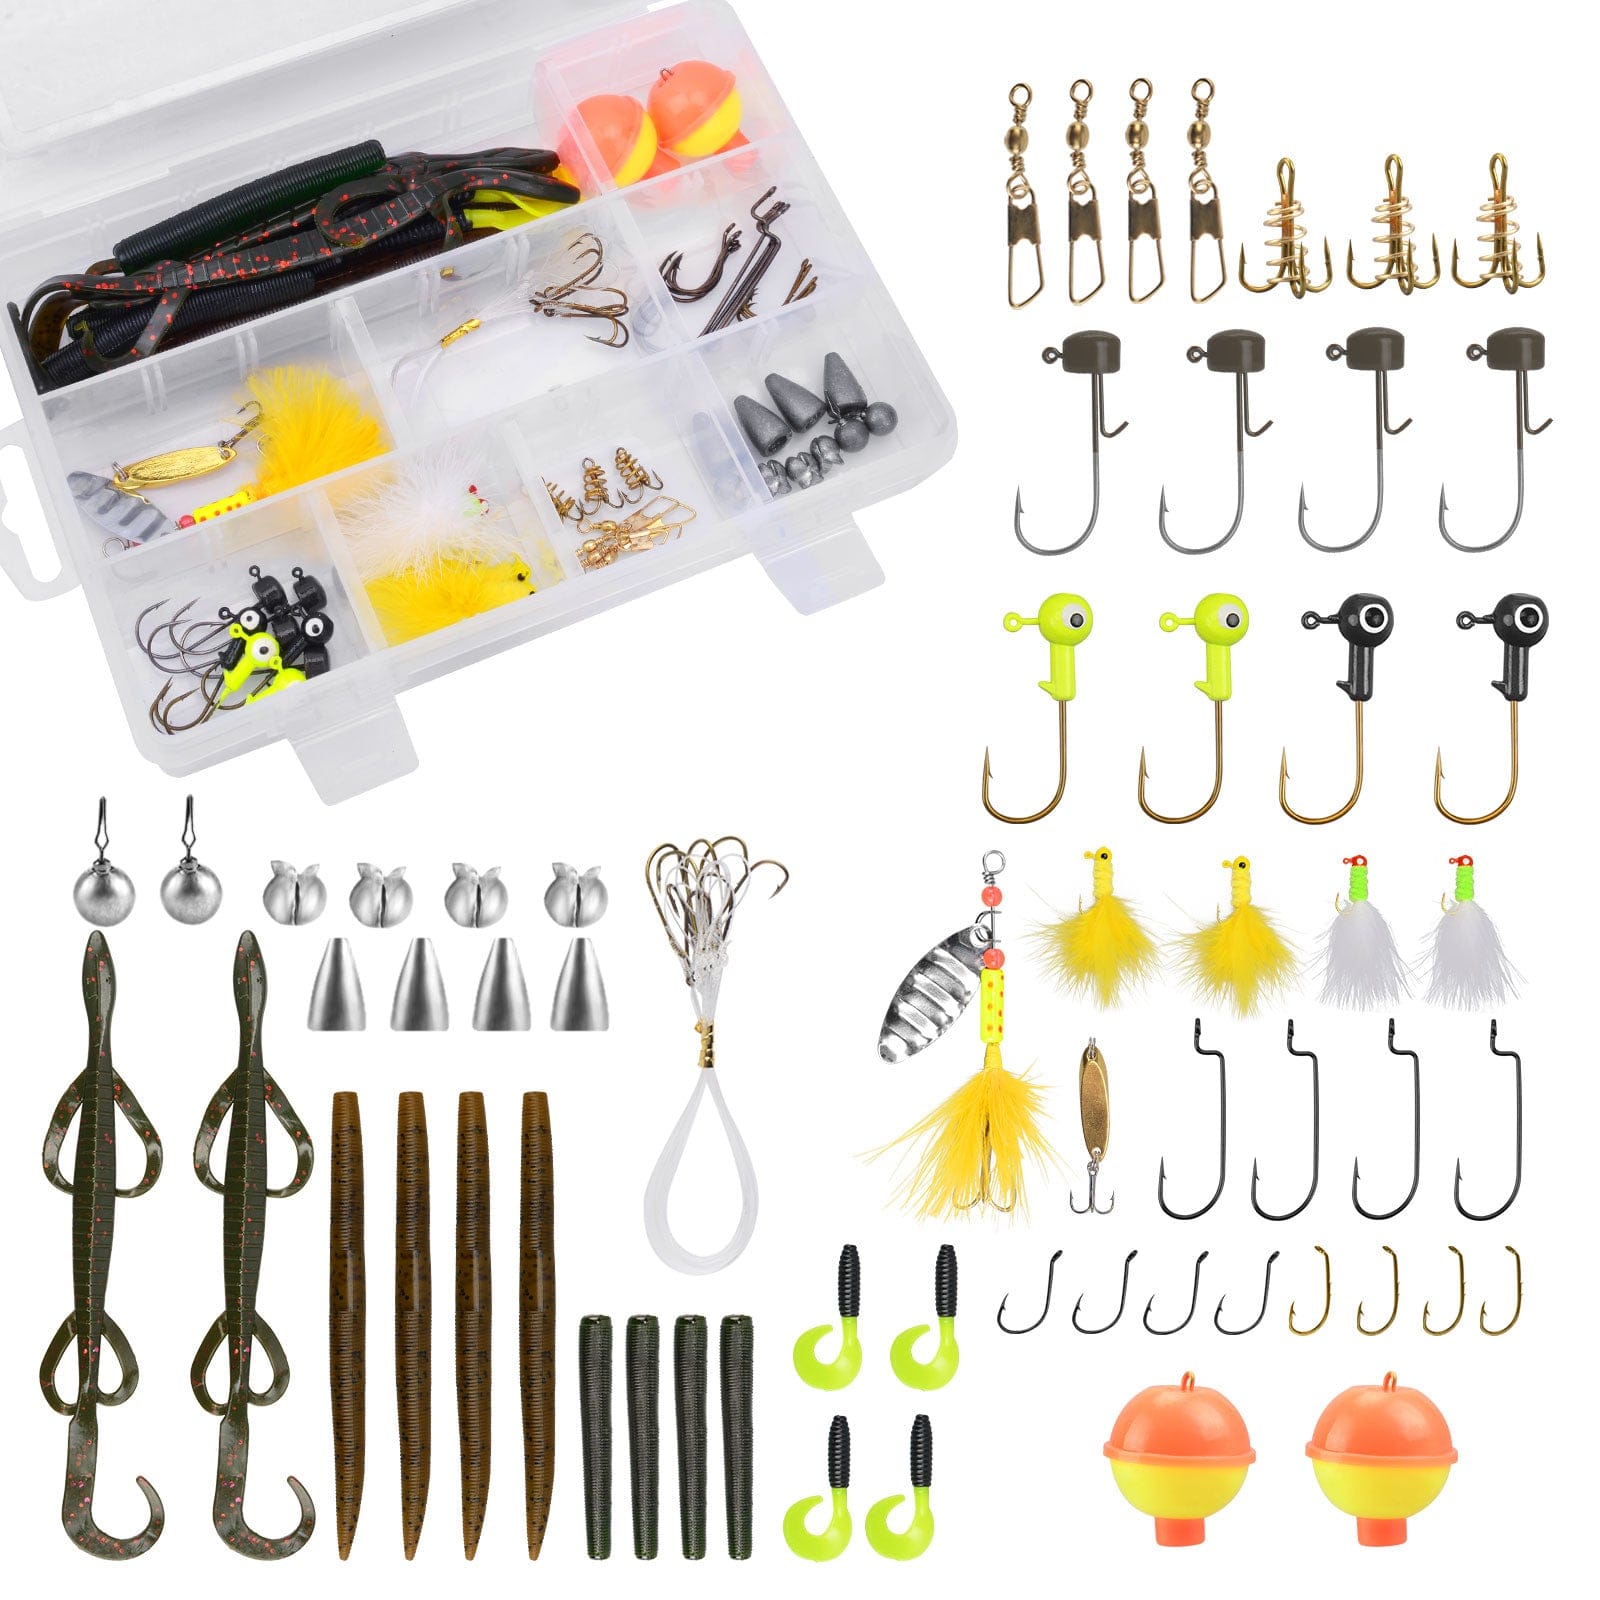 Complete catfish tackle box kits are available on the website. Insane